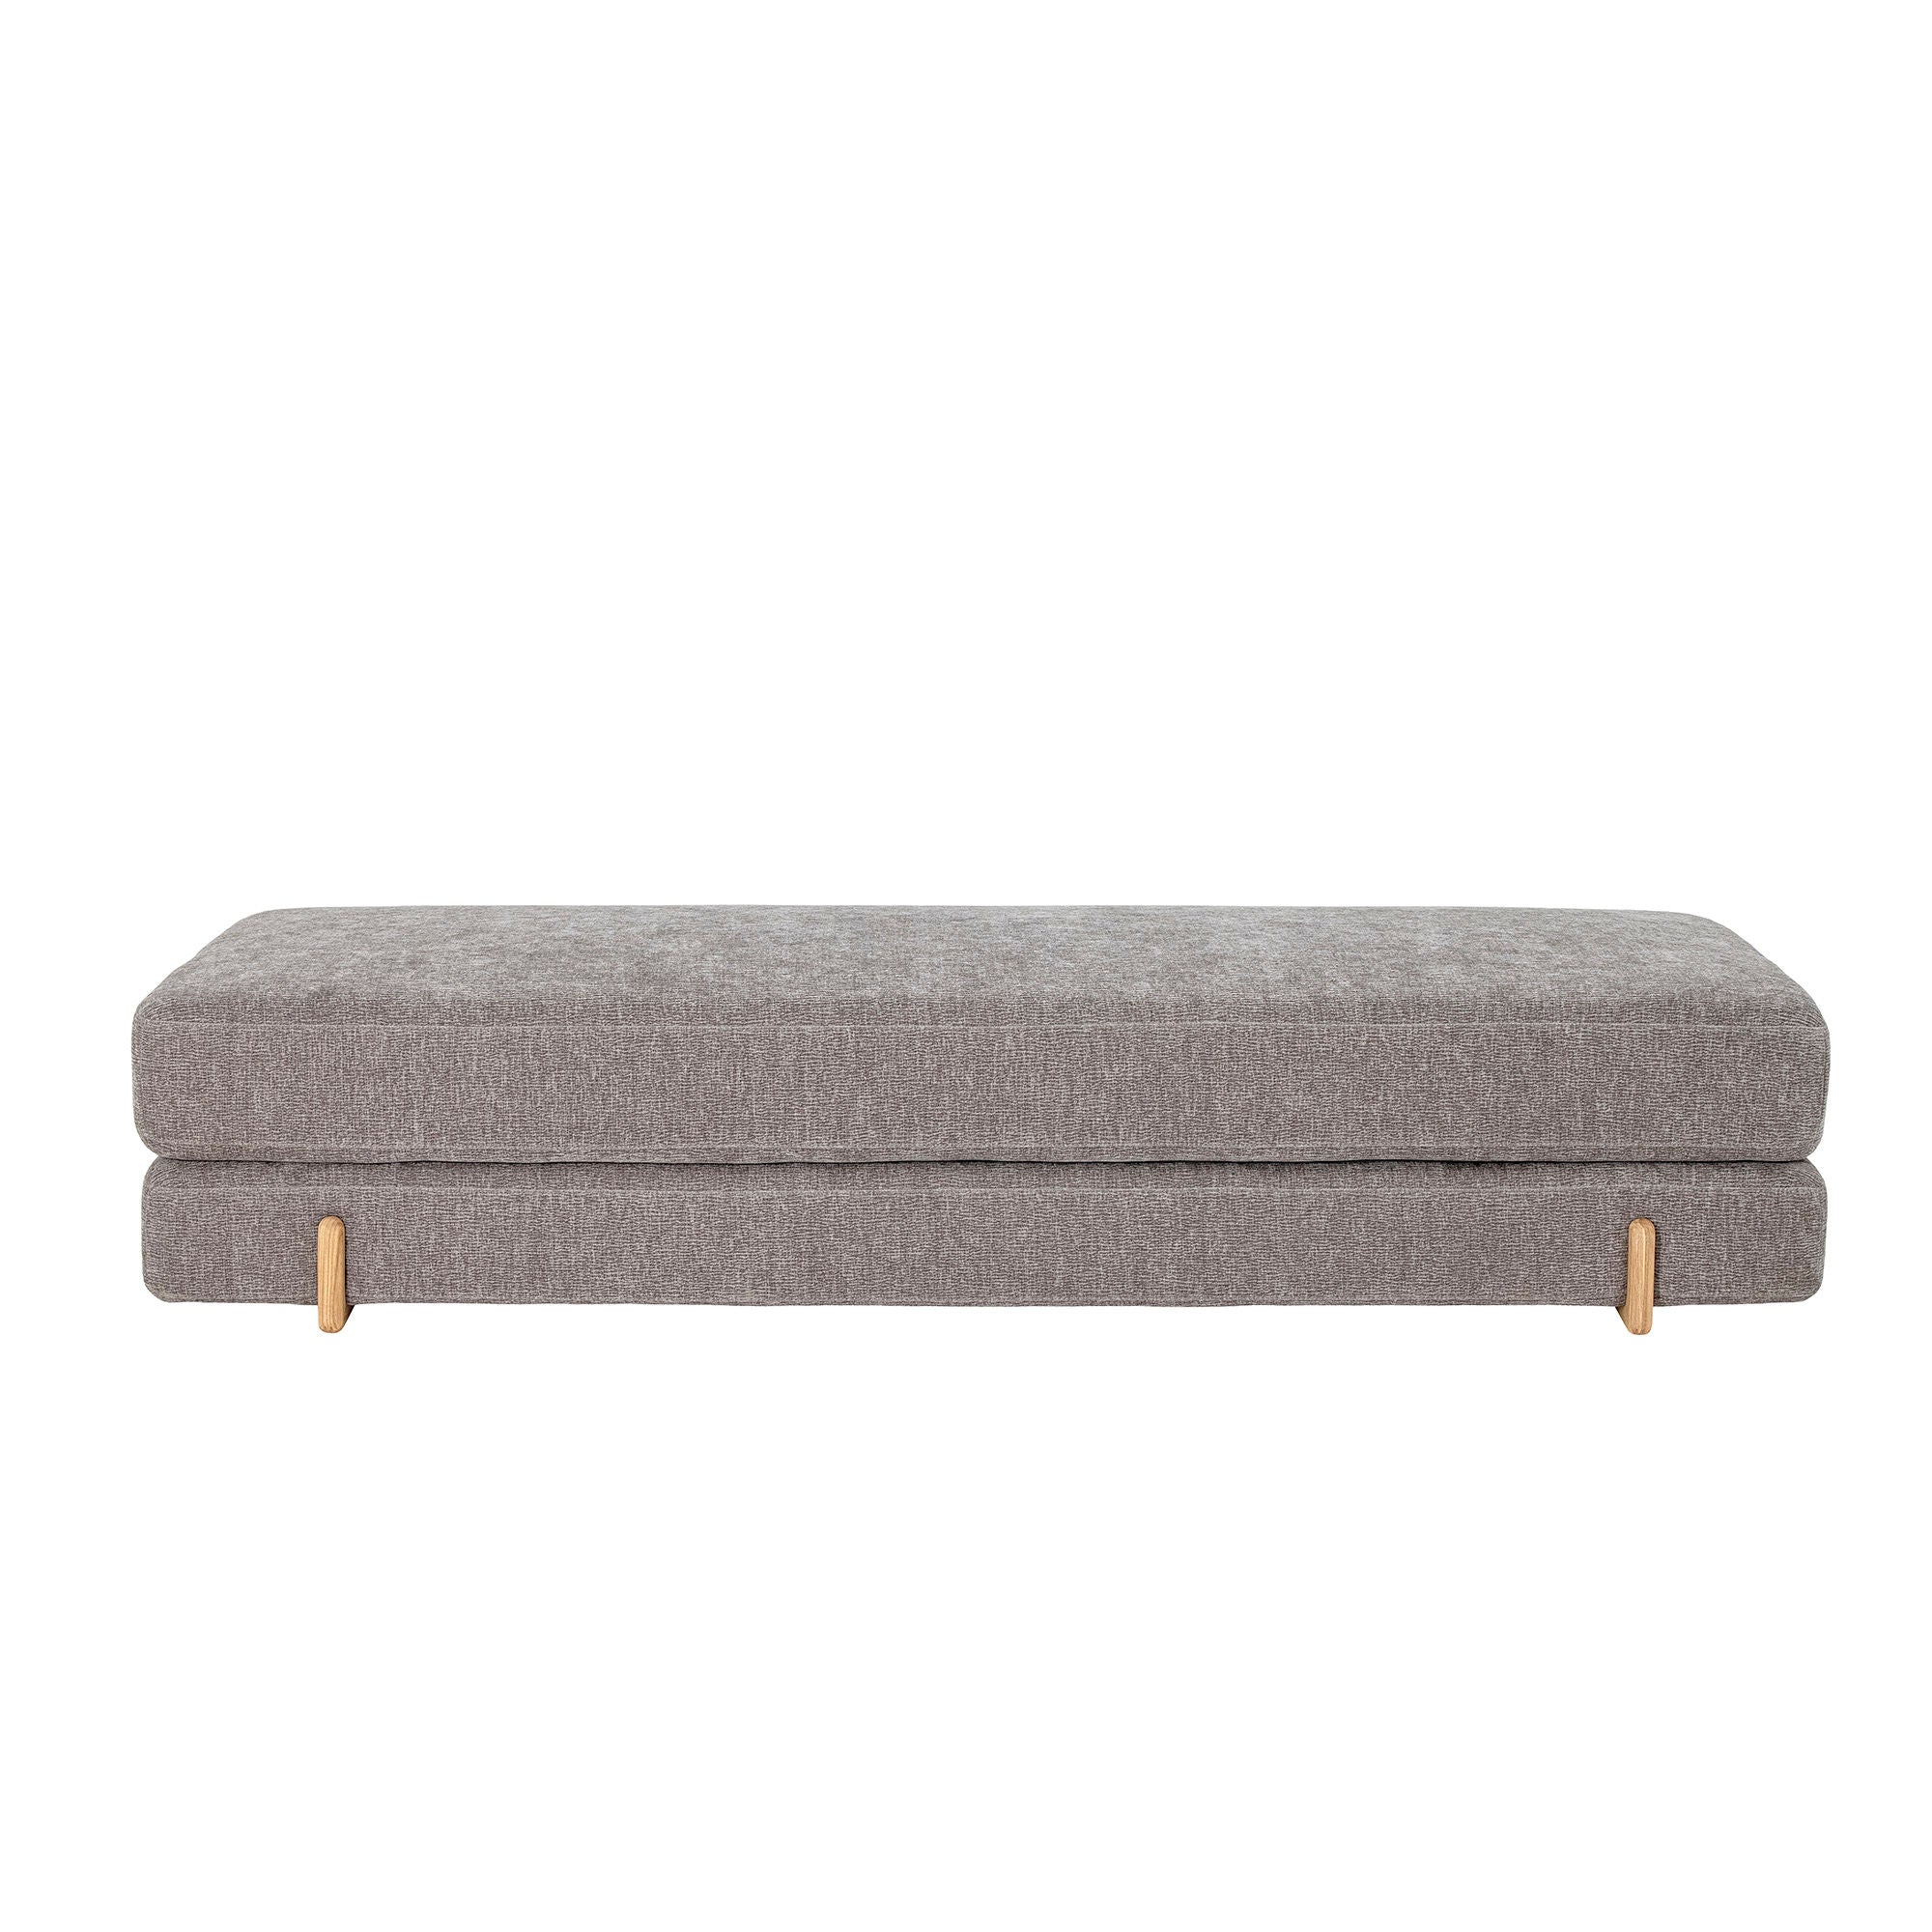 Bloomingville groove daybed, grigio, poliestere